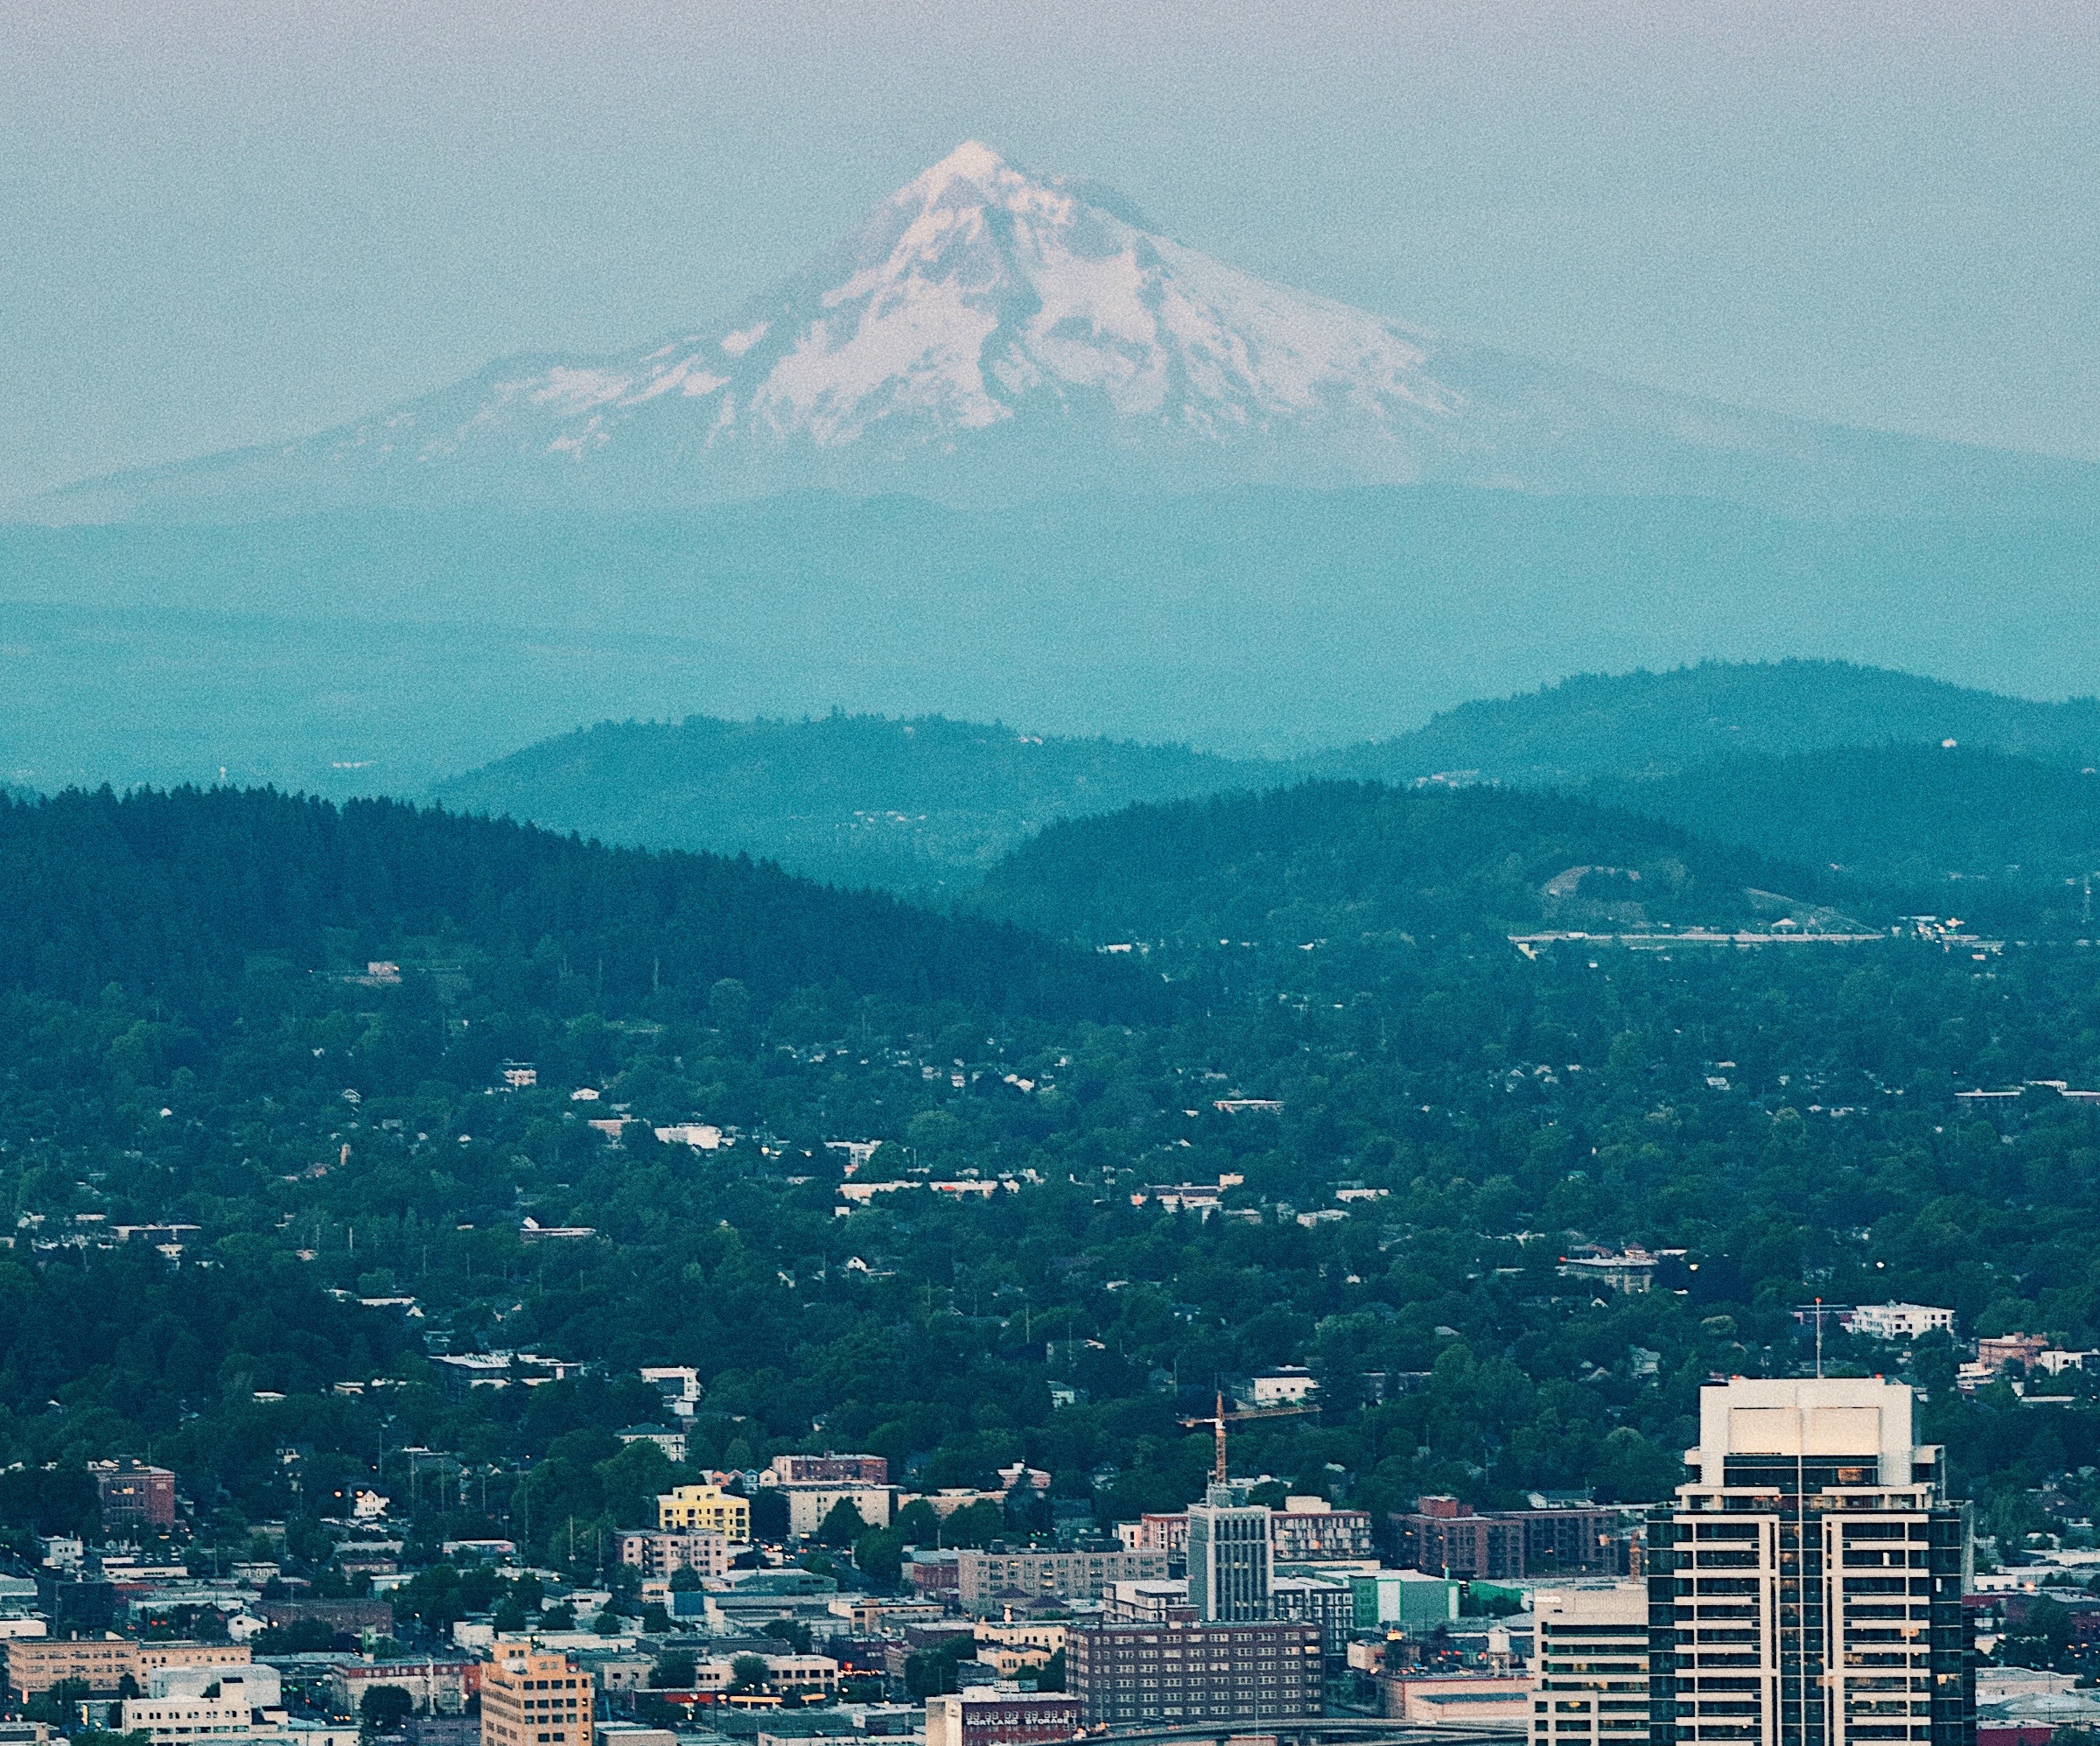 The State of Oregon's first-in-the-nation rent control bill caps annual rent hikes to seven percent (plus inflation), and is one of the quickest ways to alleviate pressure on housing affordability.